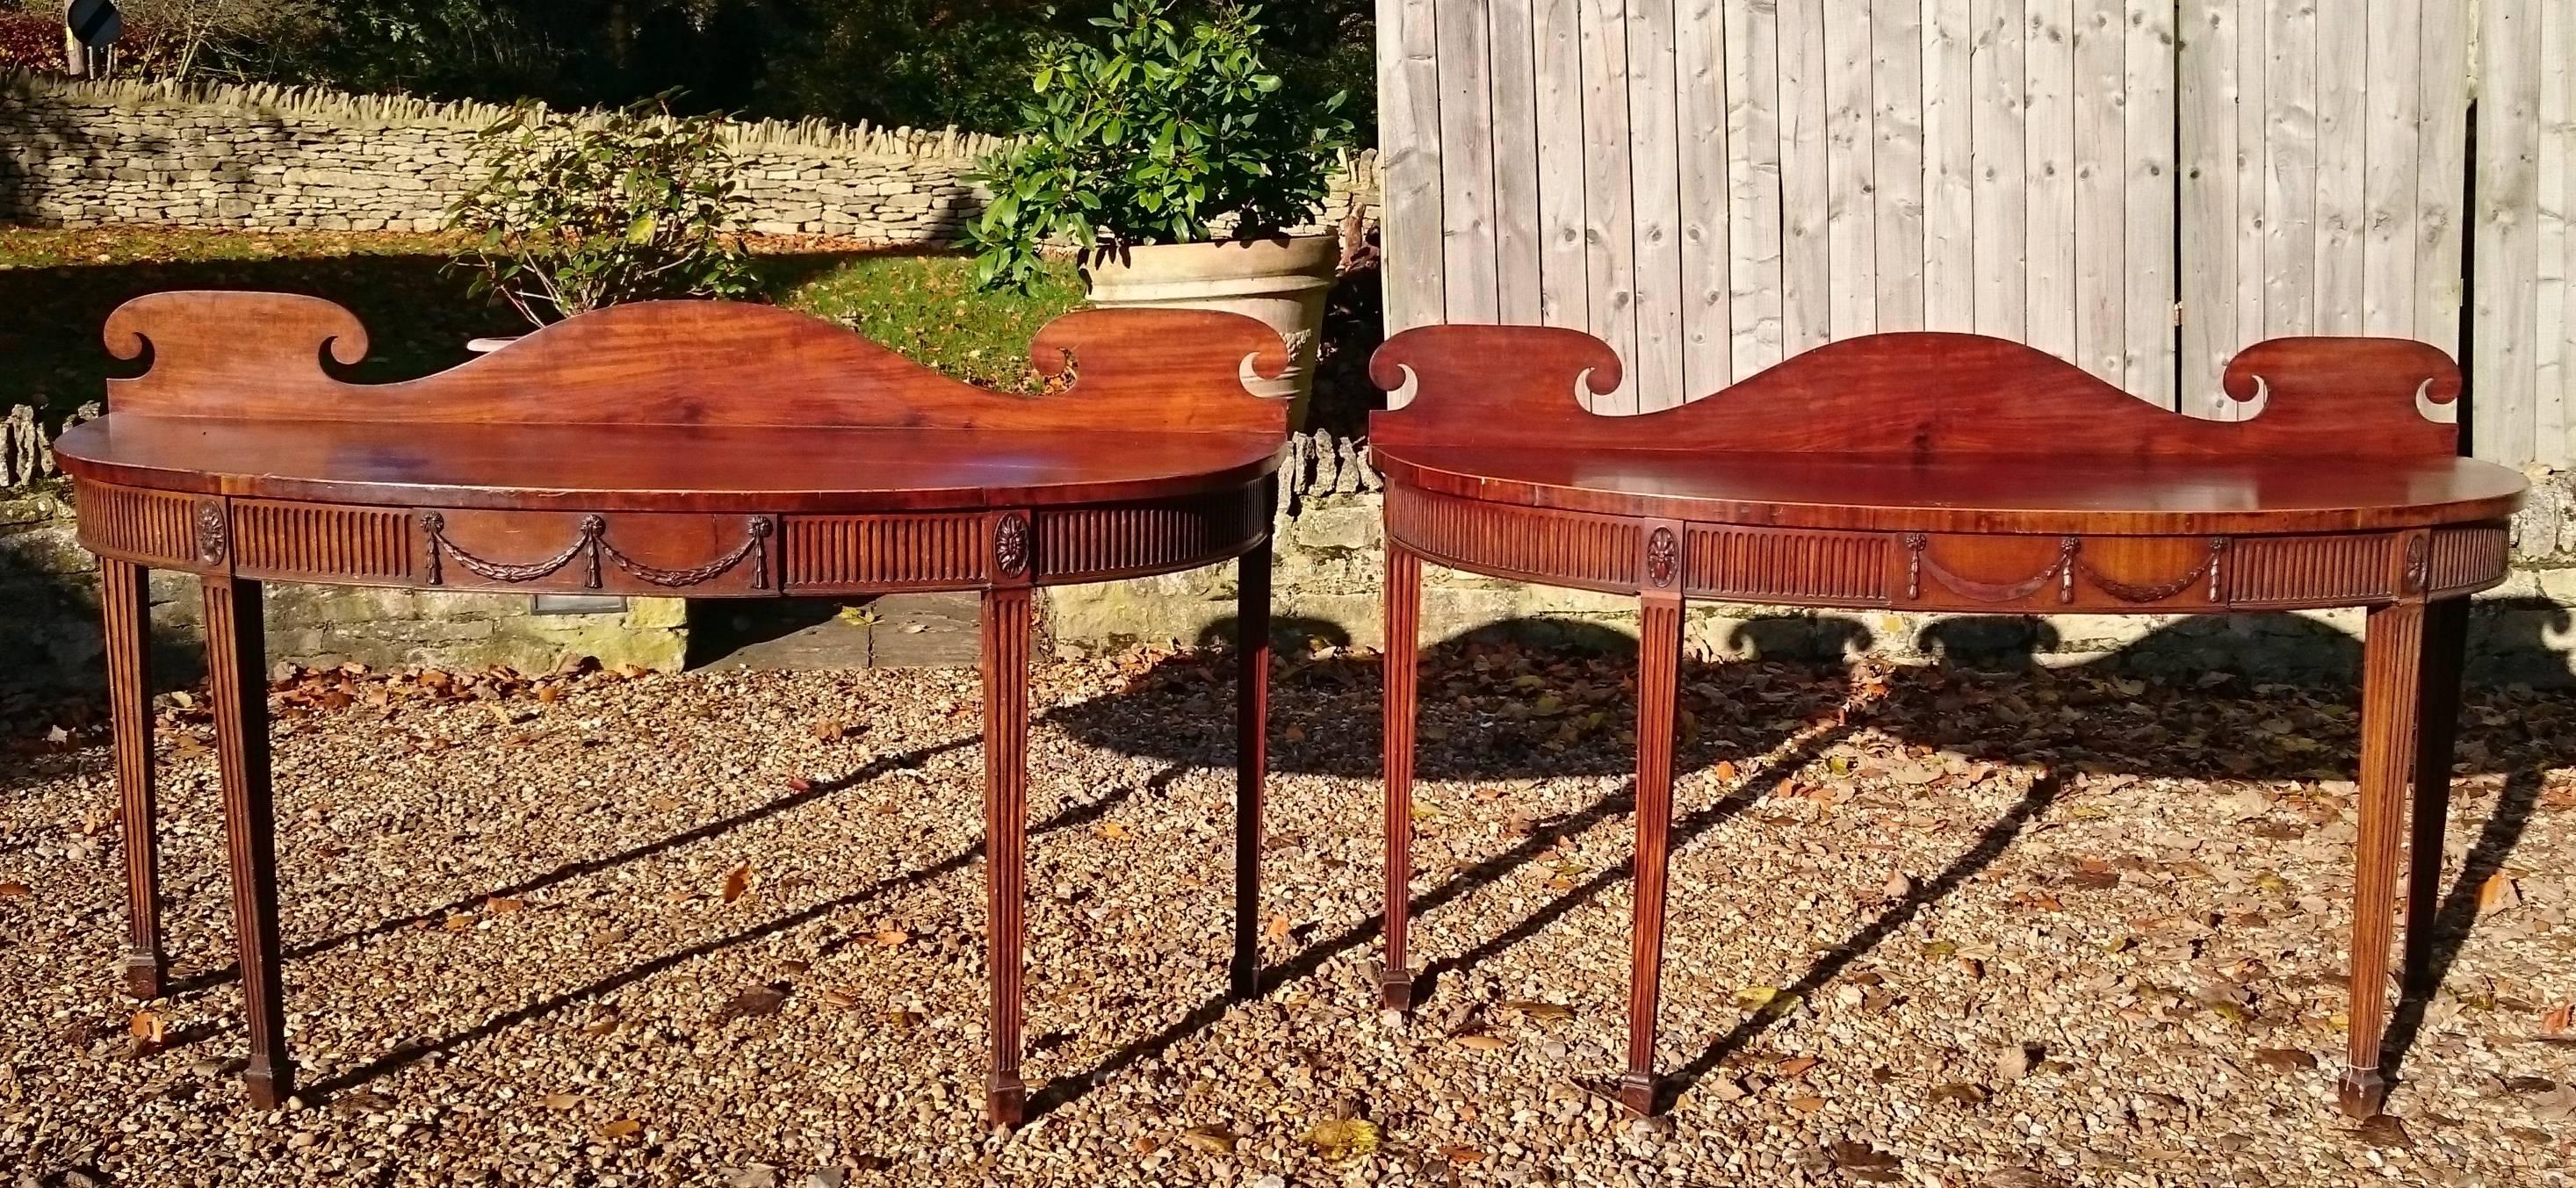 Pair of Early 19th Century George III Period Mahogany Console Serving Tables 4